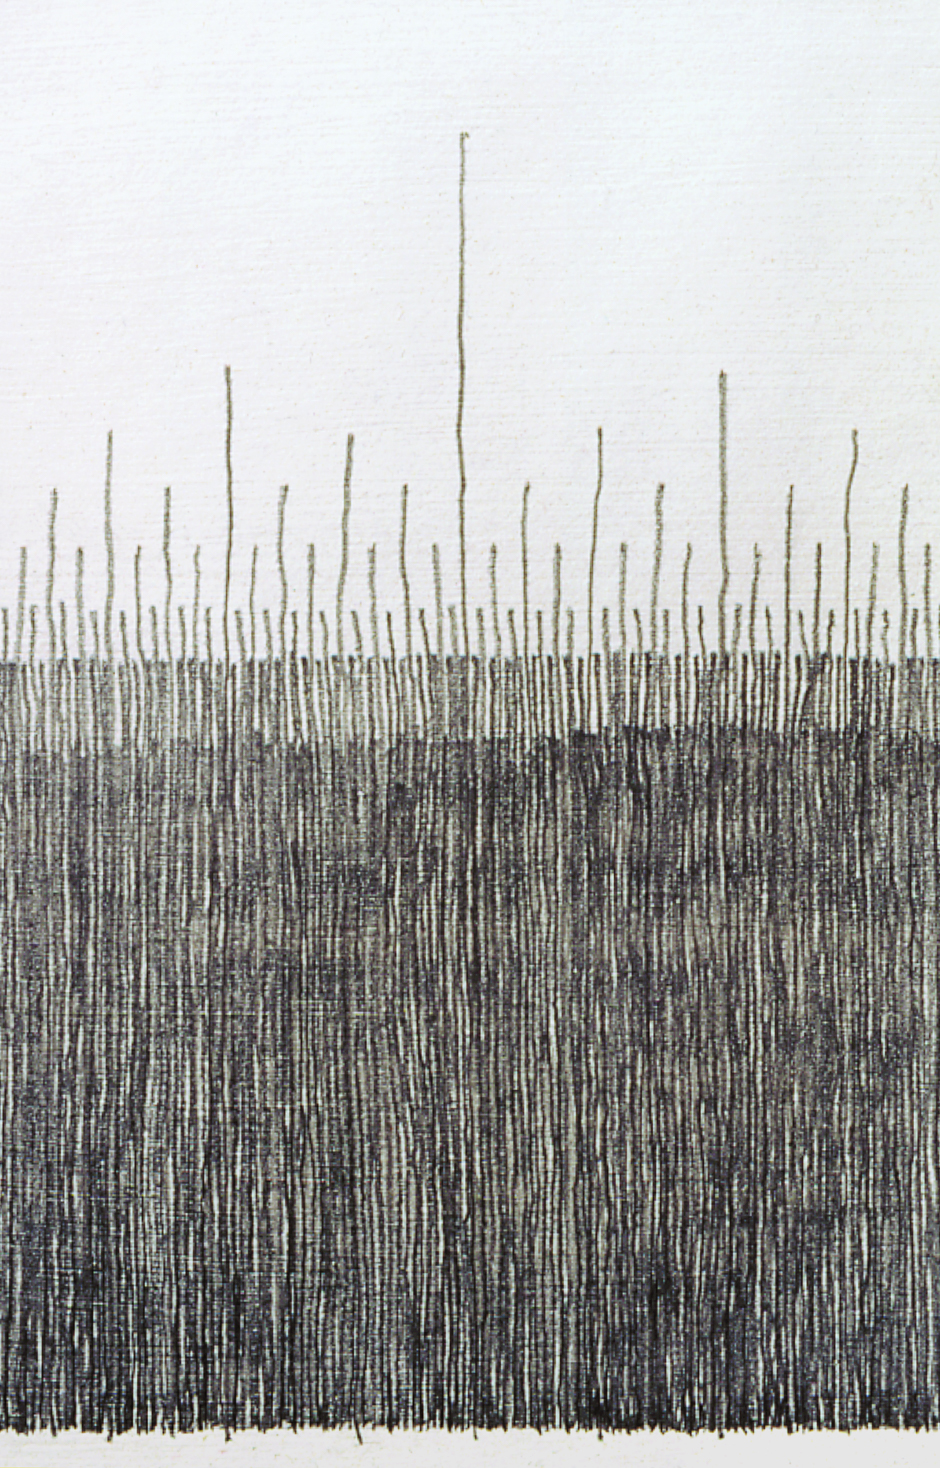 Detail image of "Infinite Division" drawing created using graphite on paper